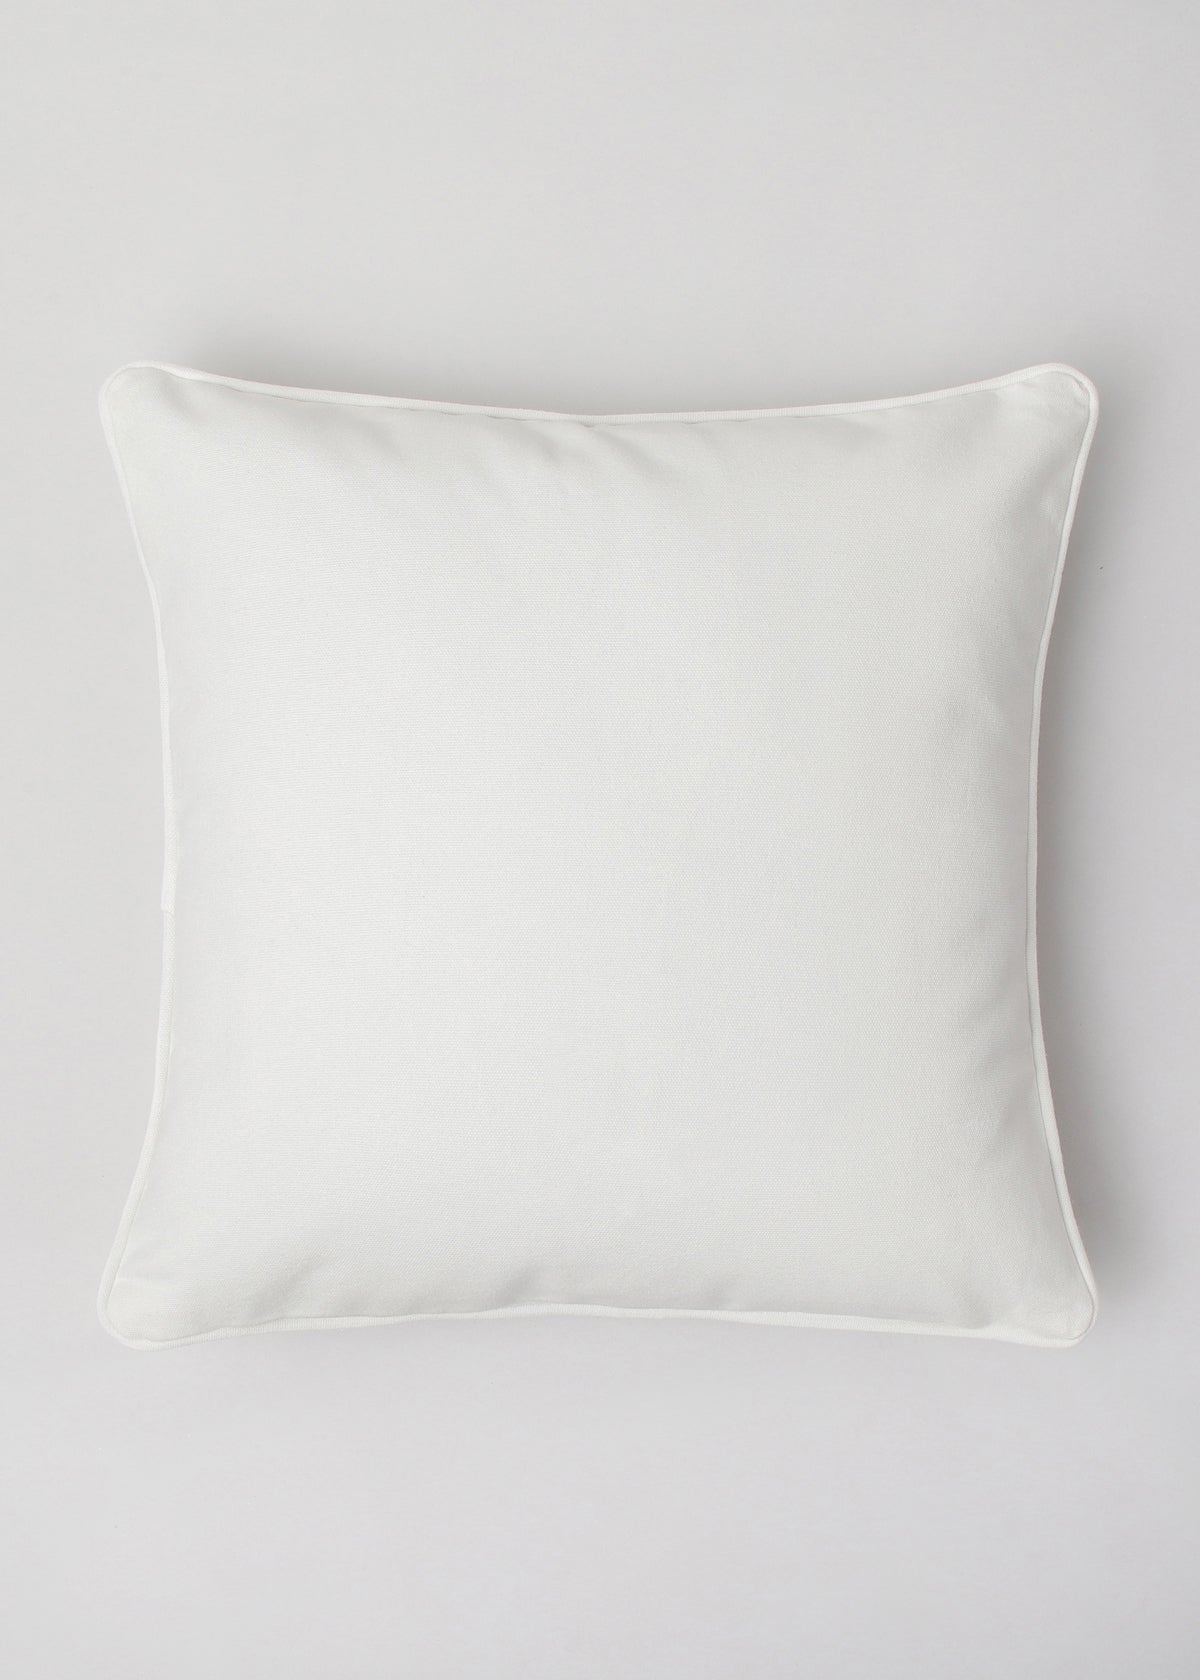 Solid Off white 100% cotton plain cushion cover for sofa